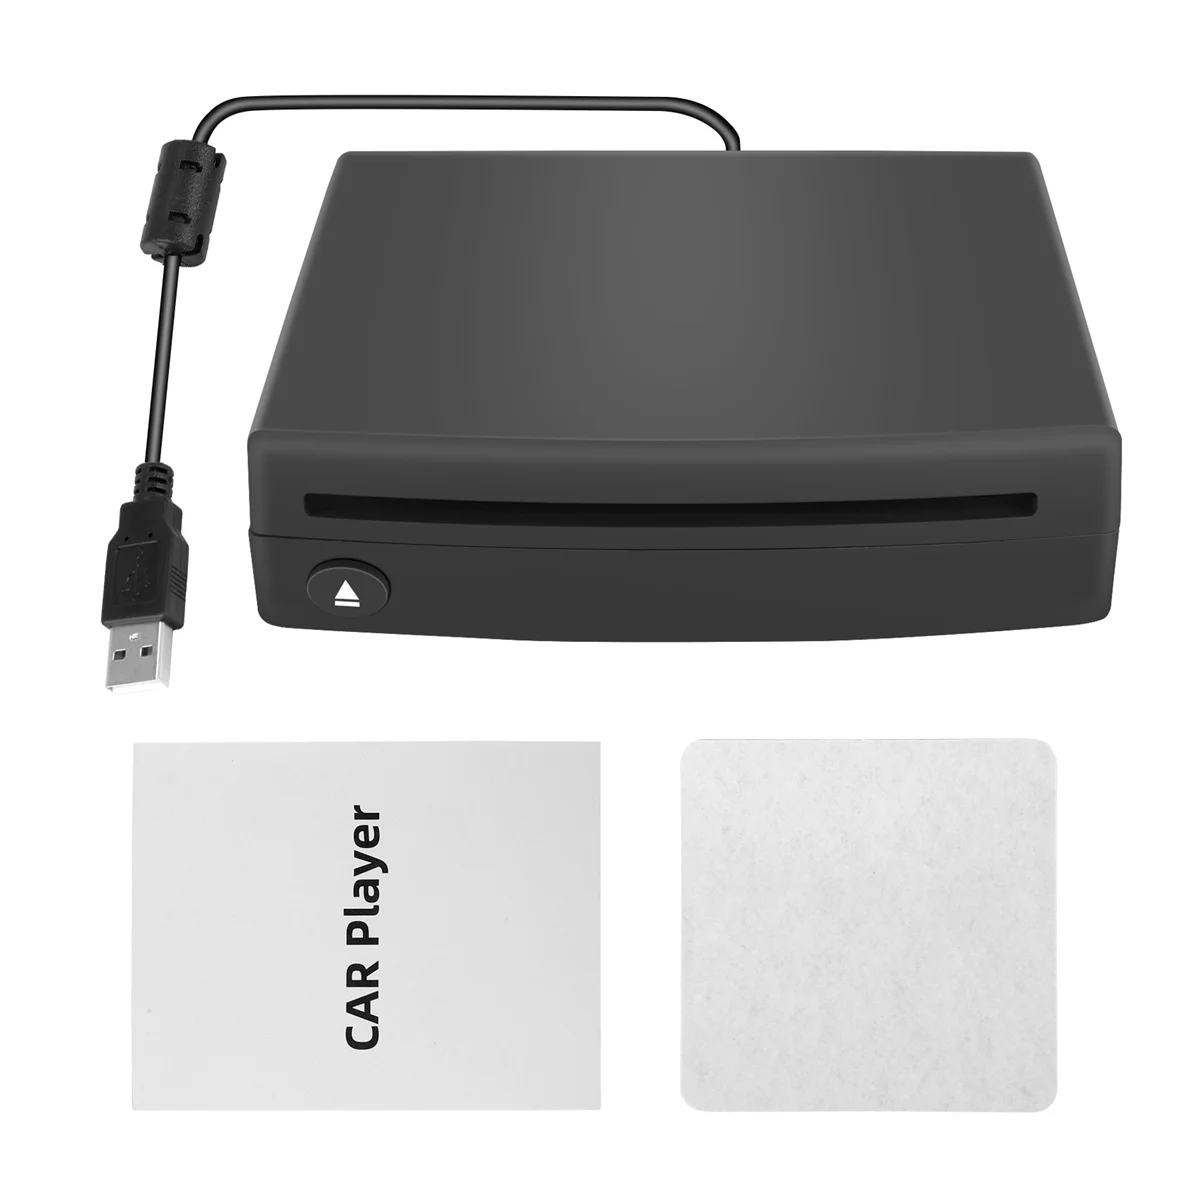 

Slim External Car CD Player Compatible PC LED TV/MP5 Android GPS Navigation Universal USB Power Slot-in Type